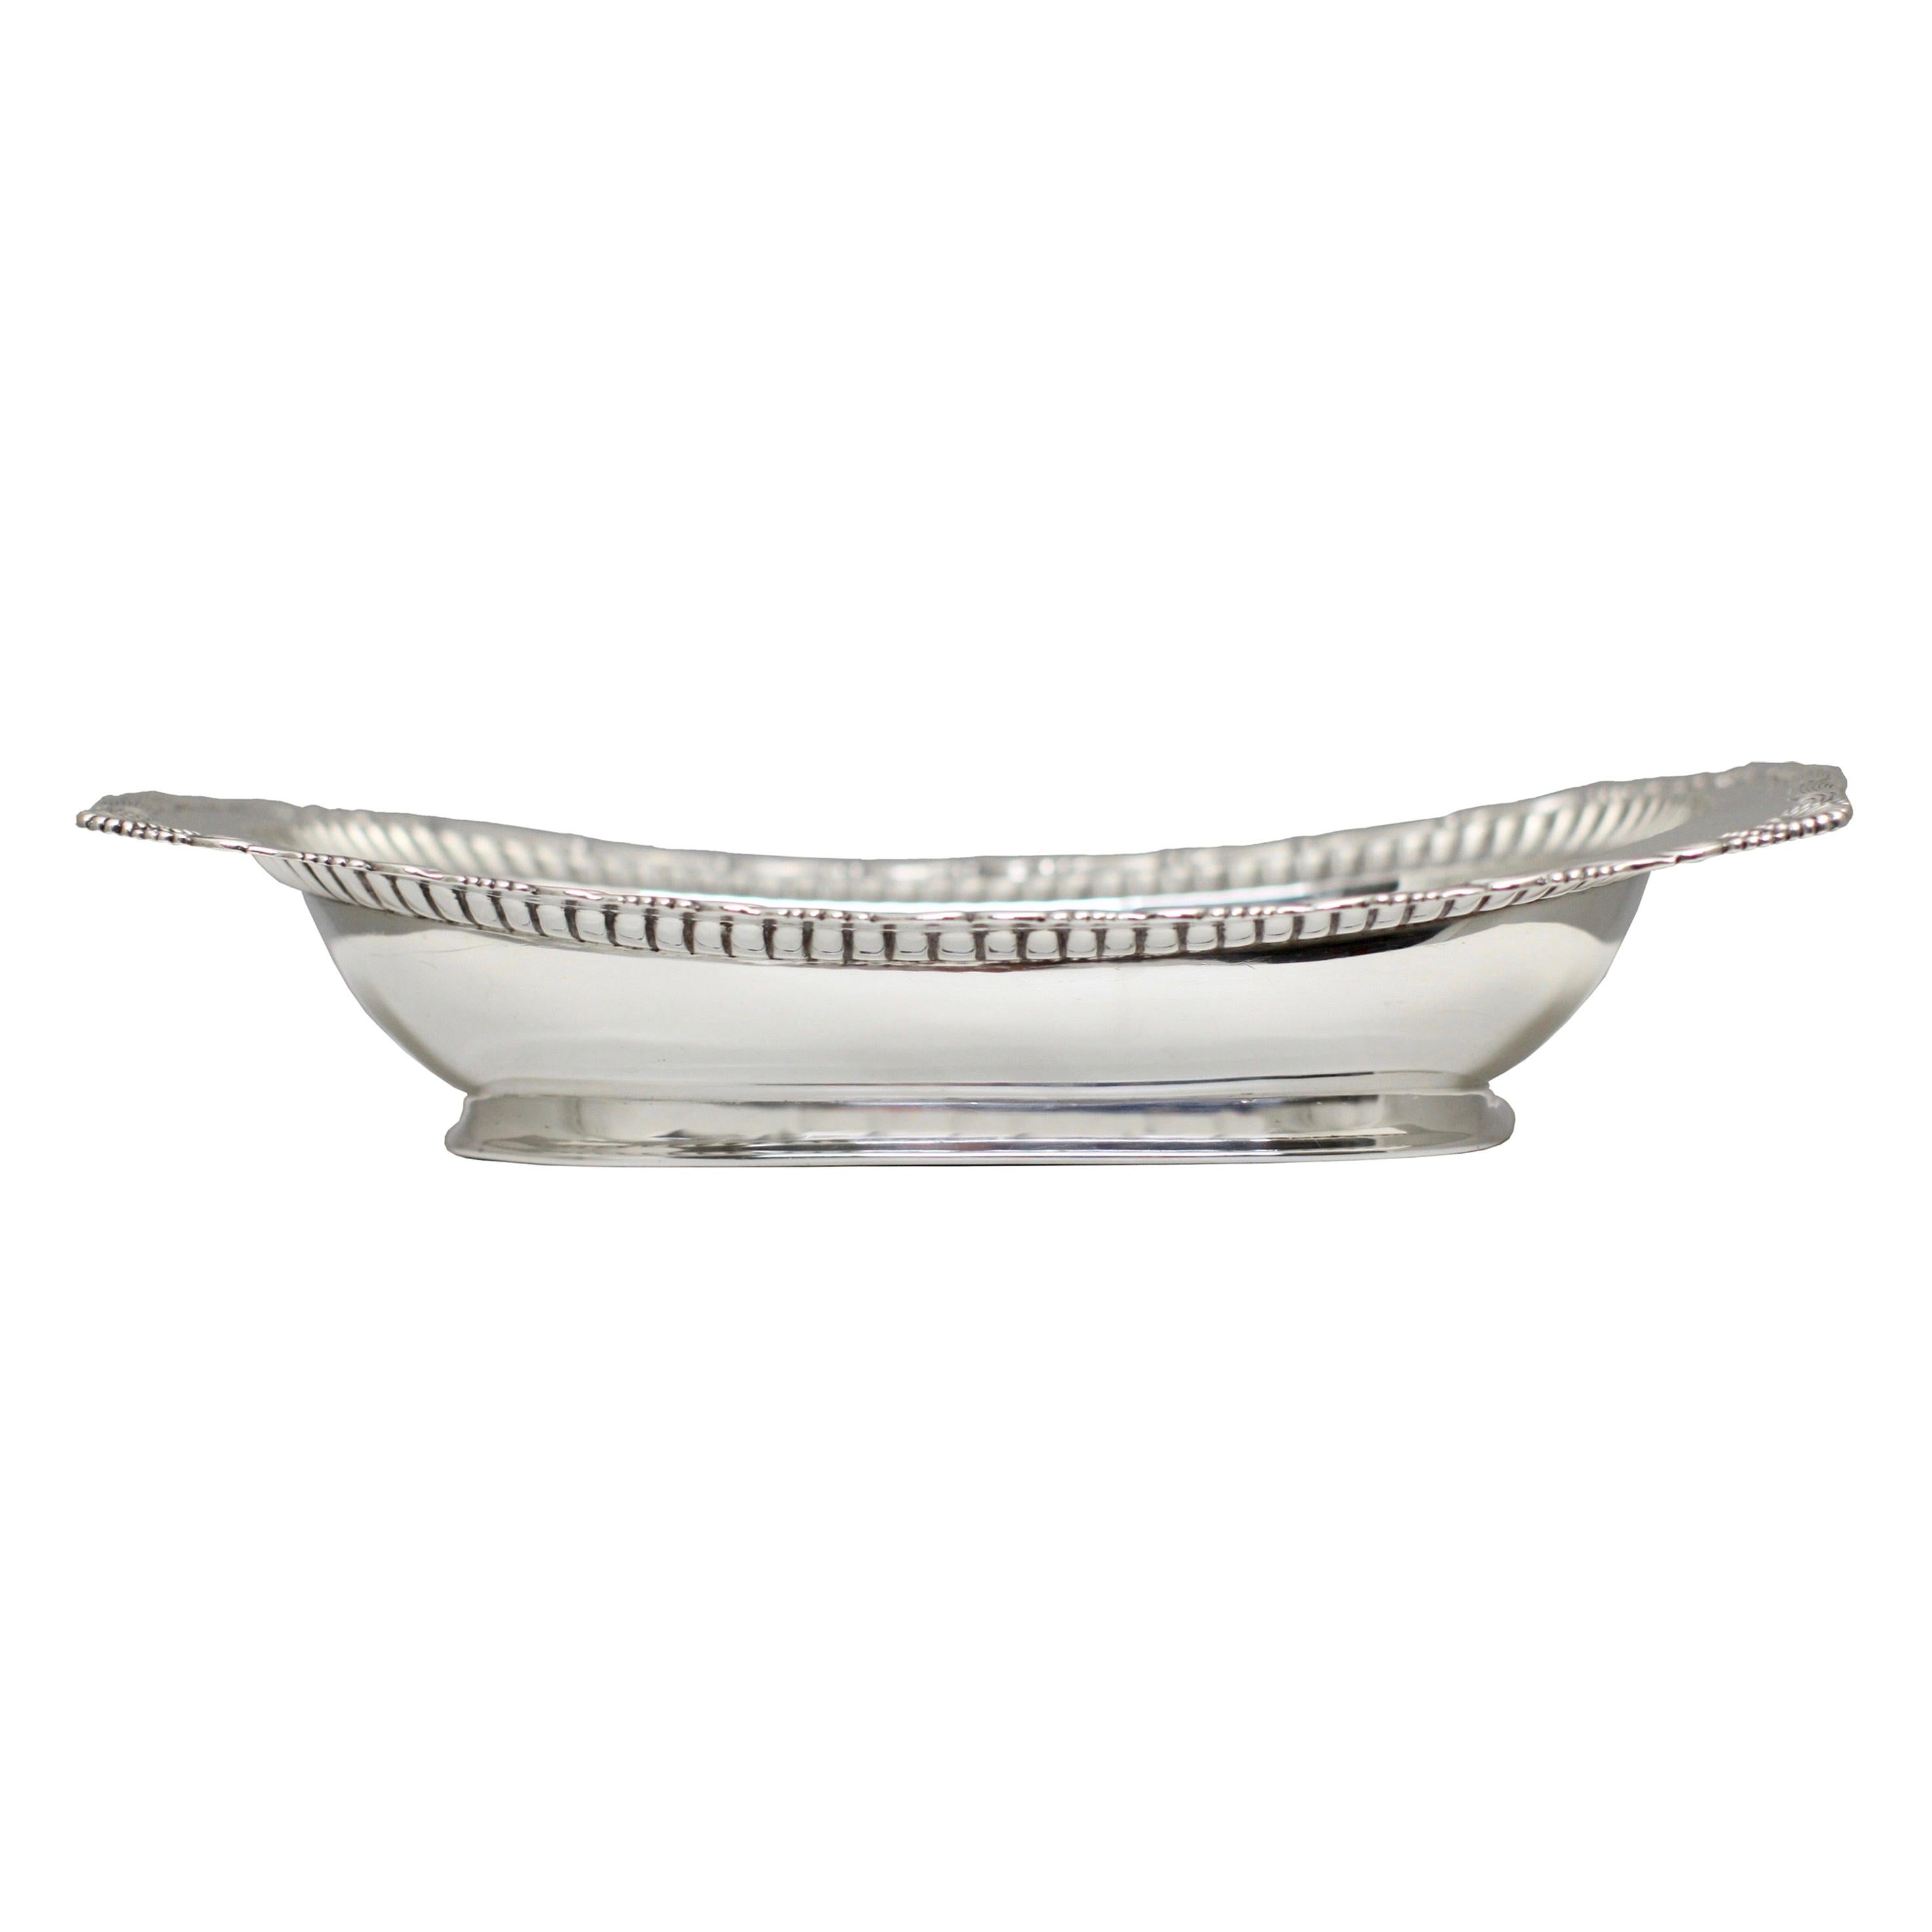 Tiffany & Co. '1891-1902' Sterling Silver Serving Bowl For Sale